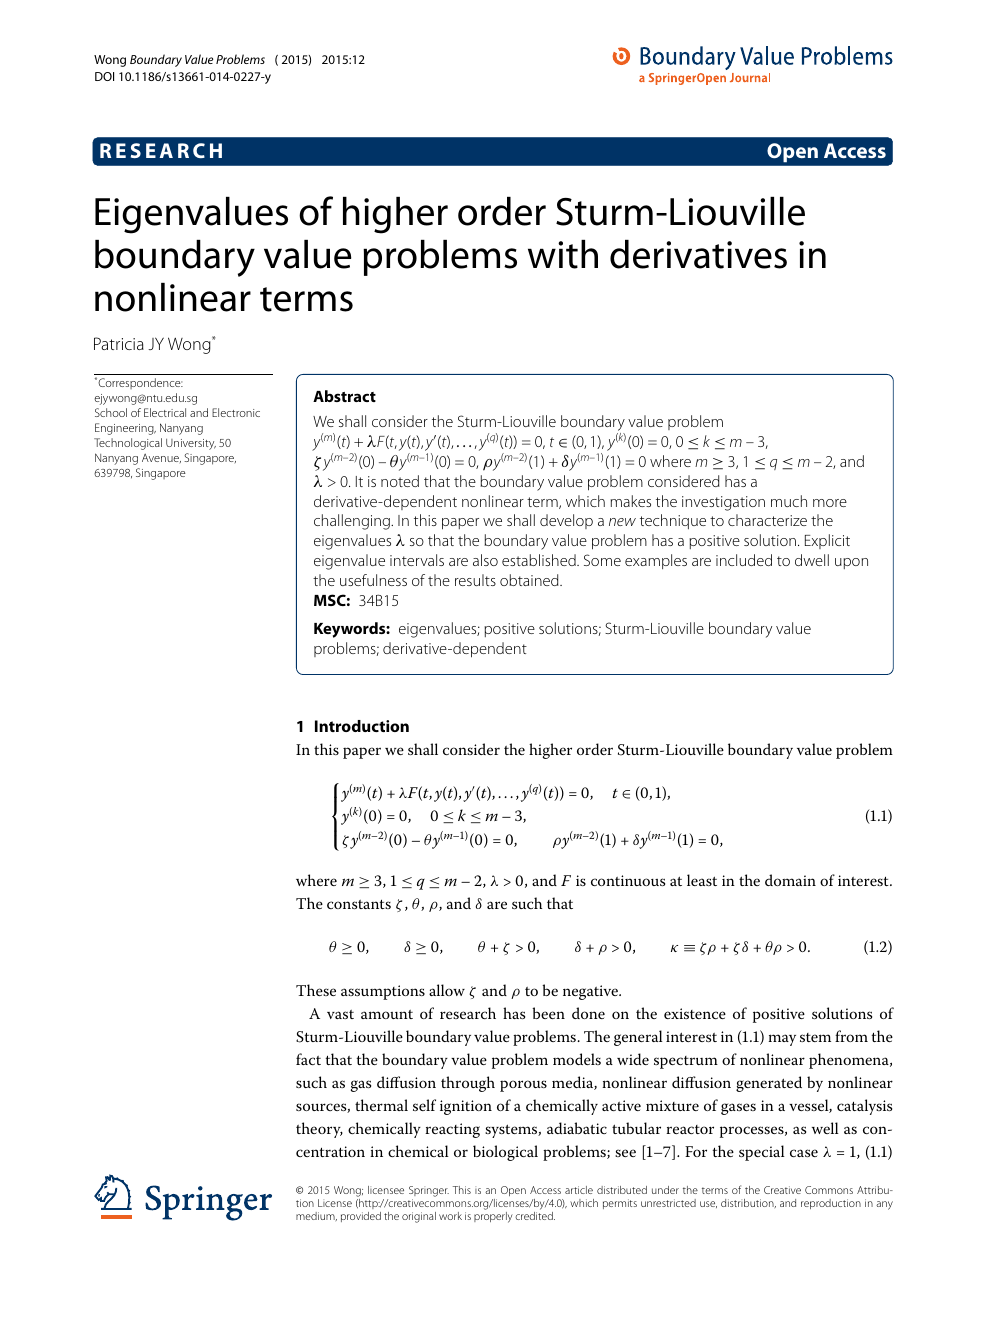 Eigenvalues Of Higher Order Sturm Liouville Boundary Value Problems With Derivatives In Nonlinear Terms Topic Of Research Paper In Mathematics Download Scholarly Article Pdf And Read For Free On Cyberleninka Open Science